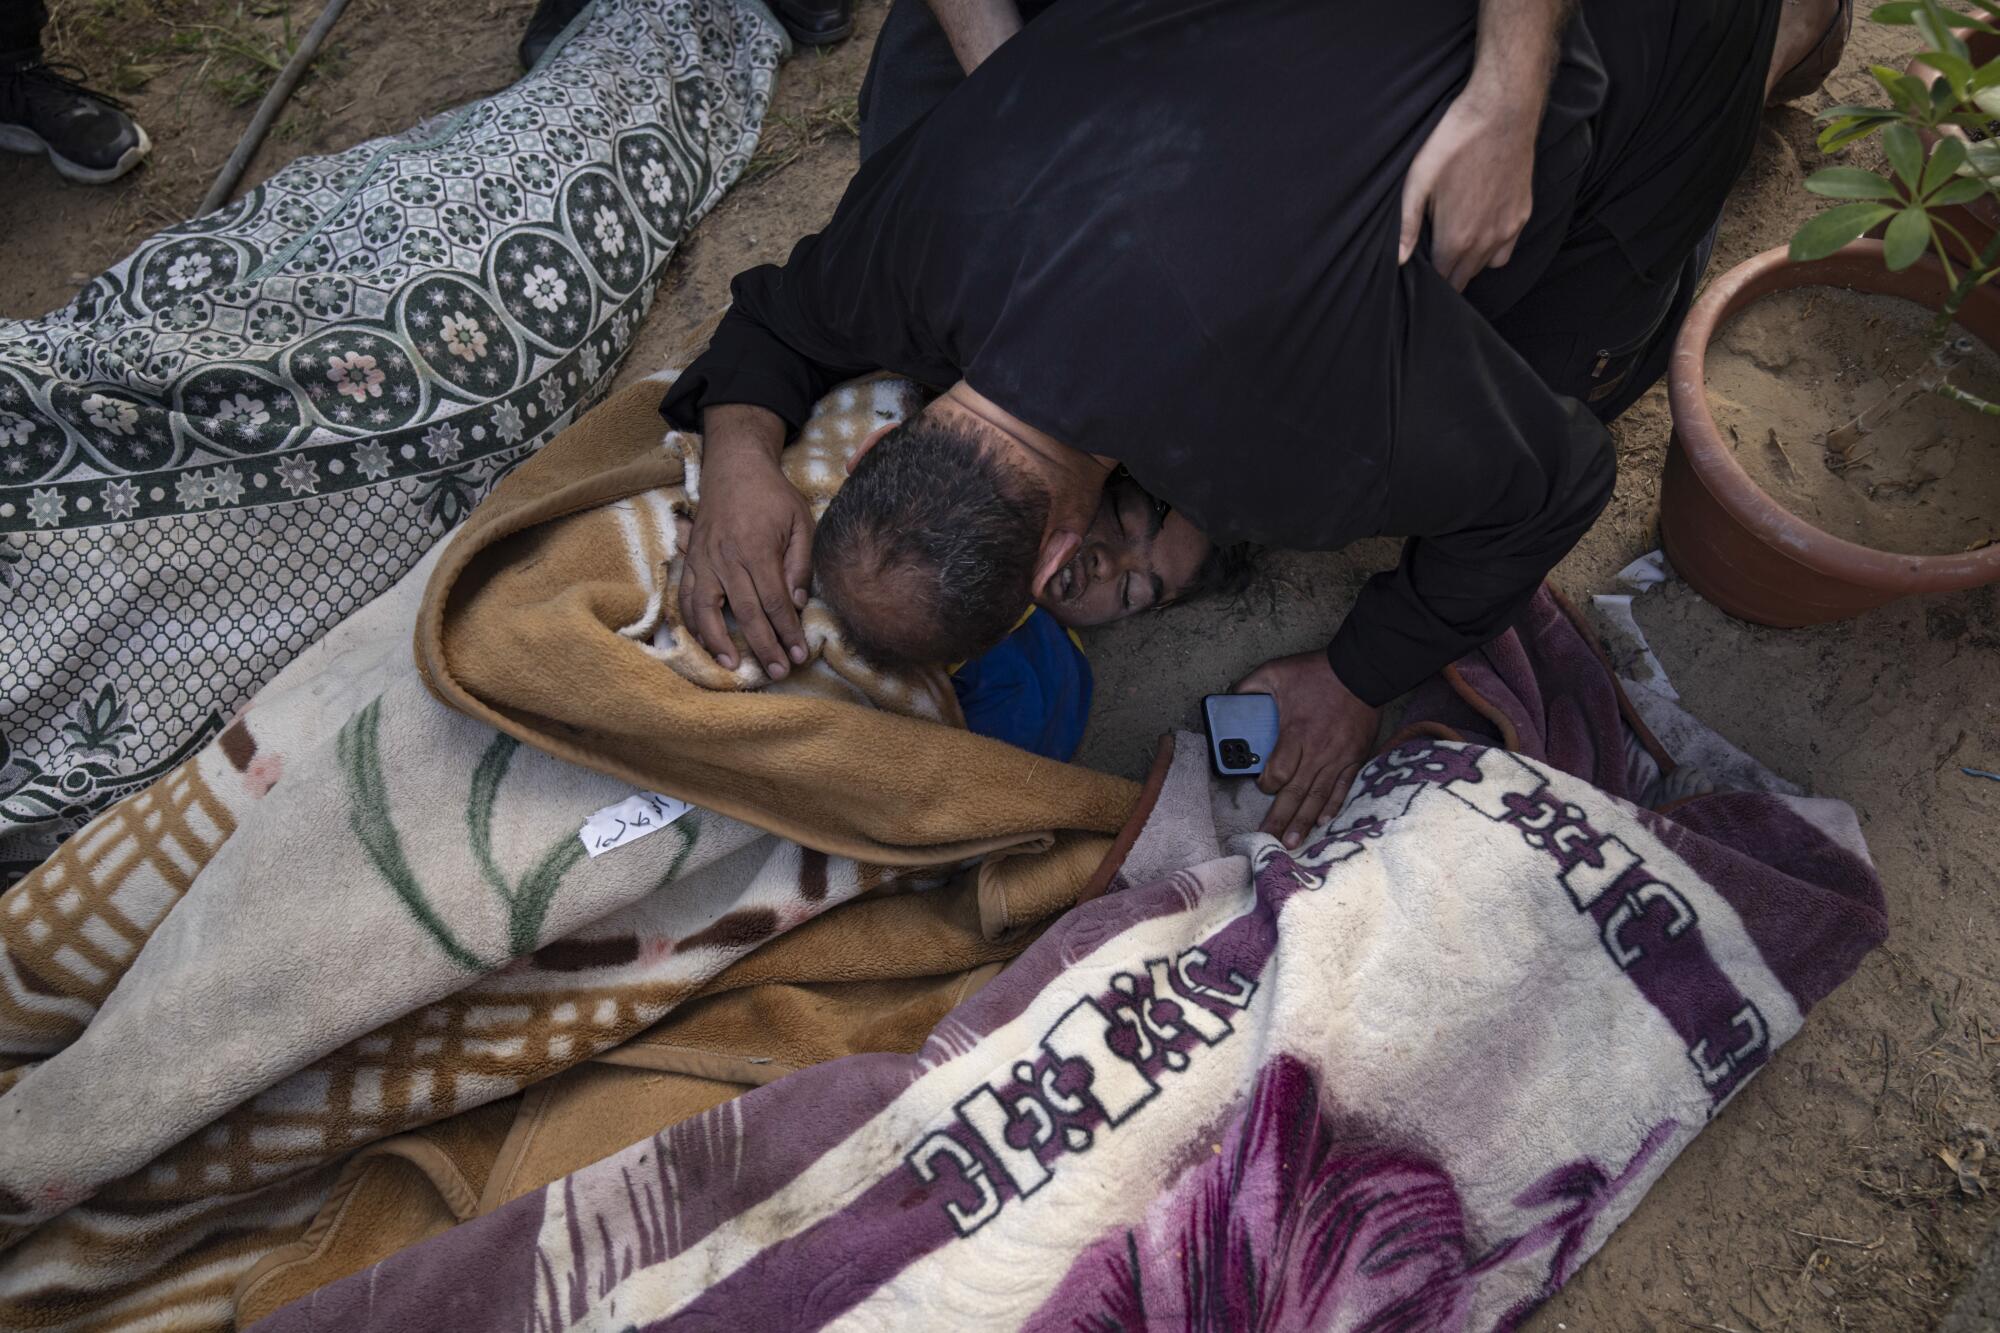 Palestinians mourn relatives killed in the Israeli bombardment of the Gaza Strip in a morgue in Khan Younis.